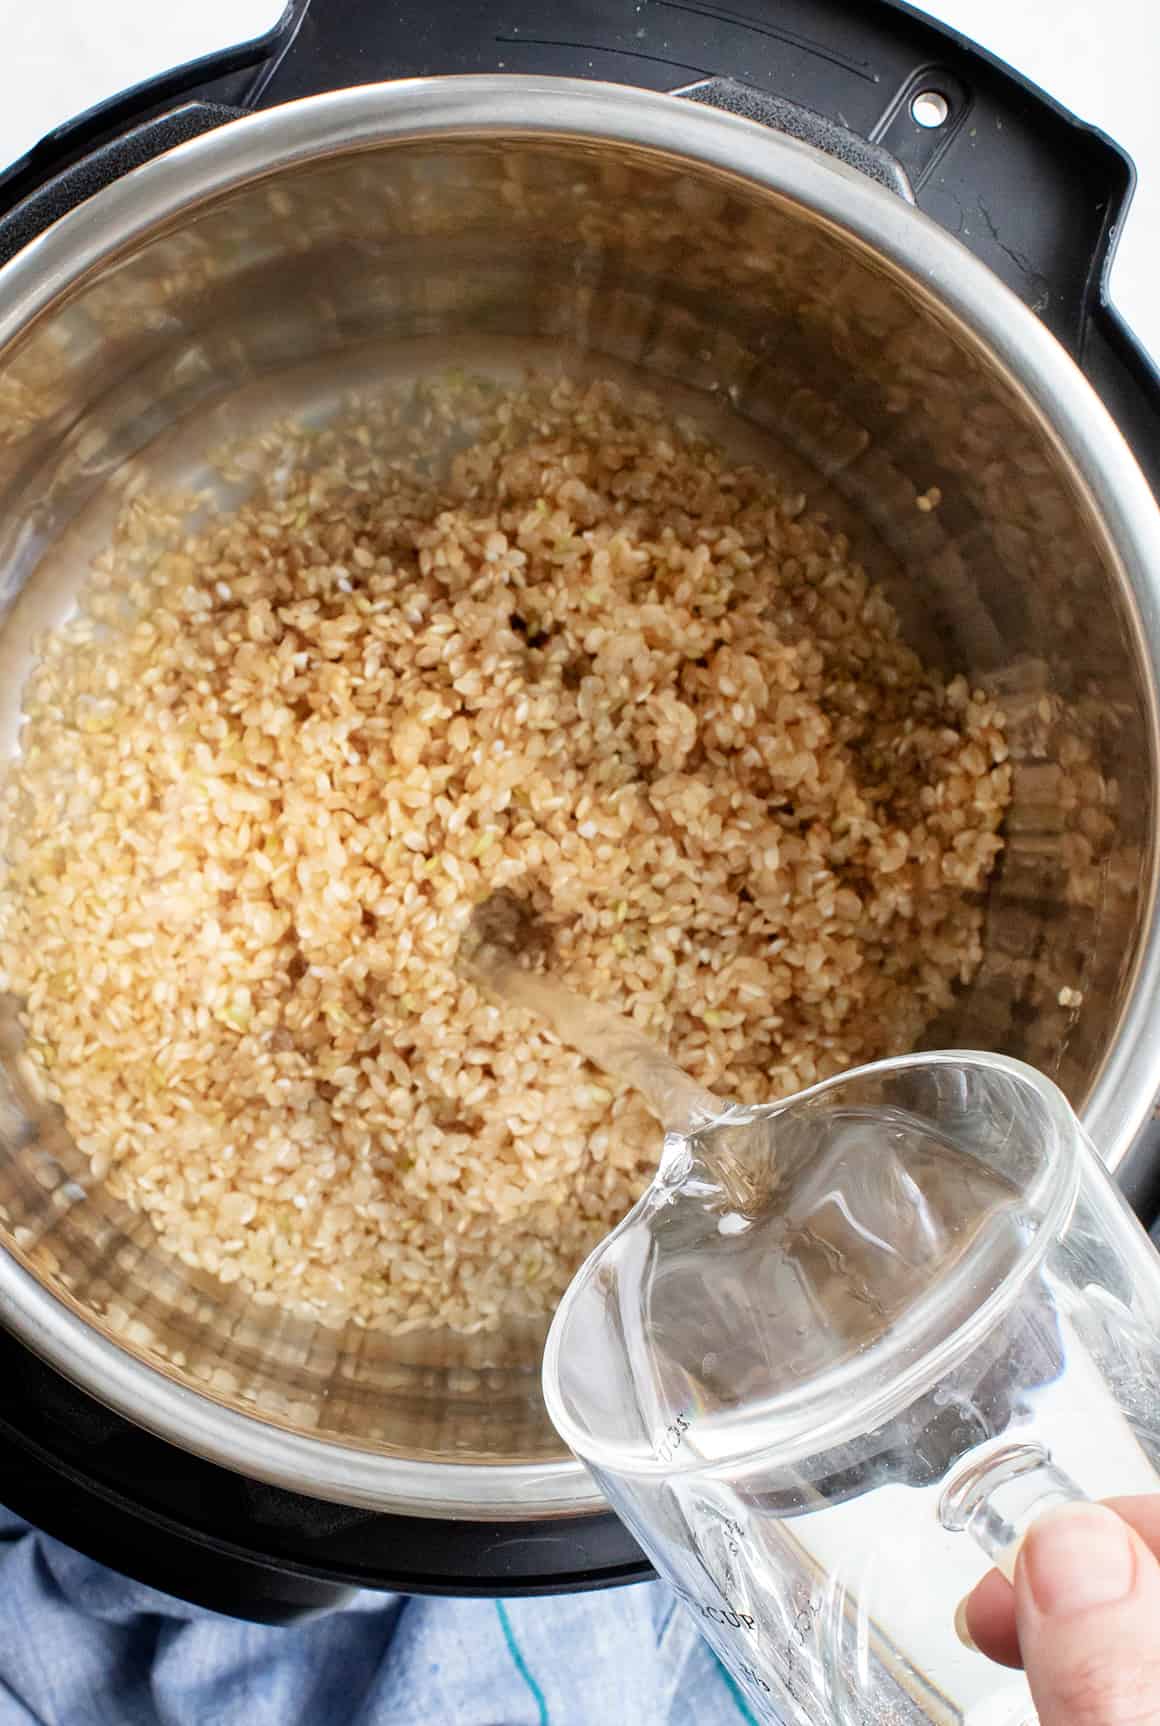 How Much Water To Use For Cooking Brown Rice In Electric Pressure Cooker